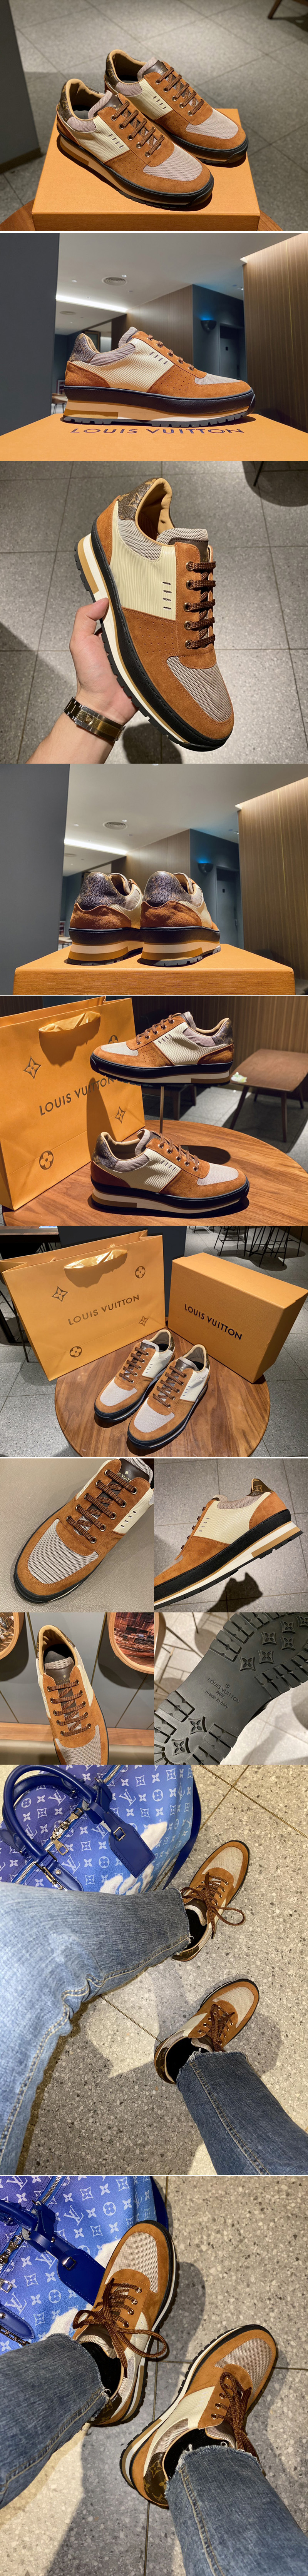 Replica Louis Vuitton 1A67T1 LV Harlem richelieu sneaker in Monogram canvas, Epi leather and calf leather